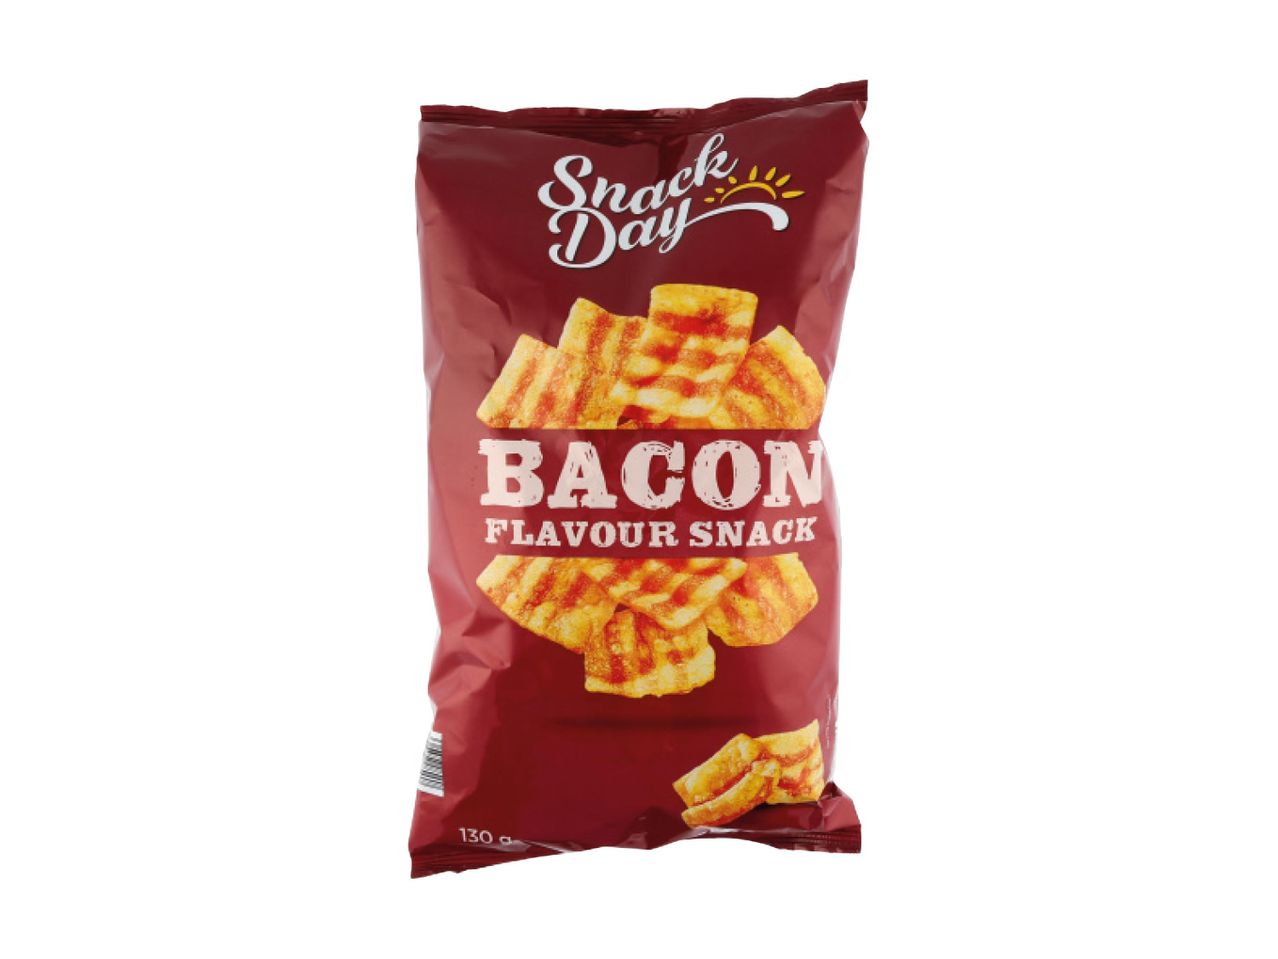 Go to full screen view: Bacon Snack - Image 1